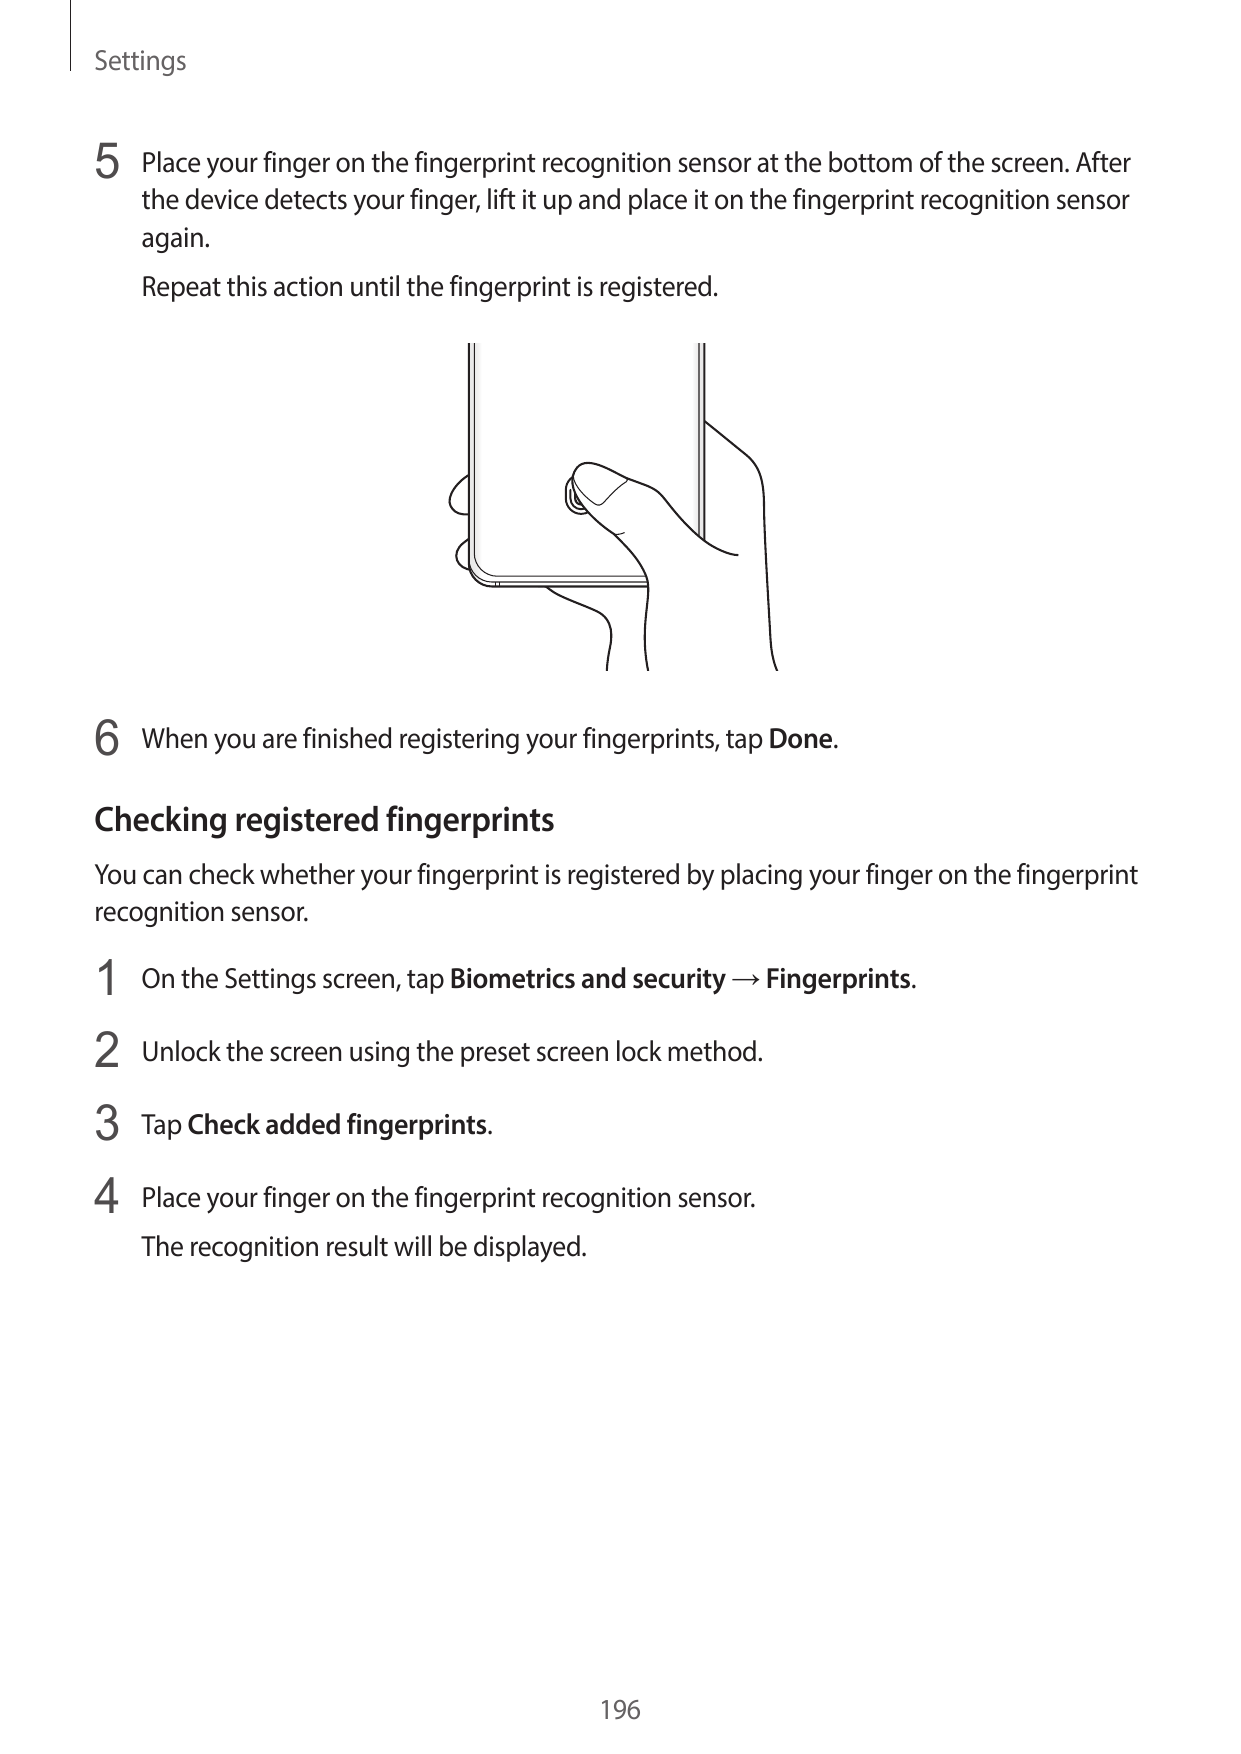 Settings5 Place your finger on the fingerprint recognition sensor at the bottom of the screen. Afterthe device detects your fing